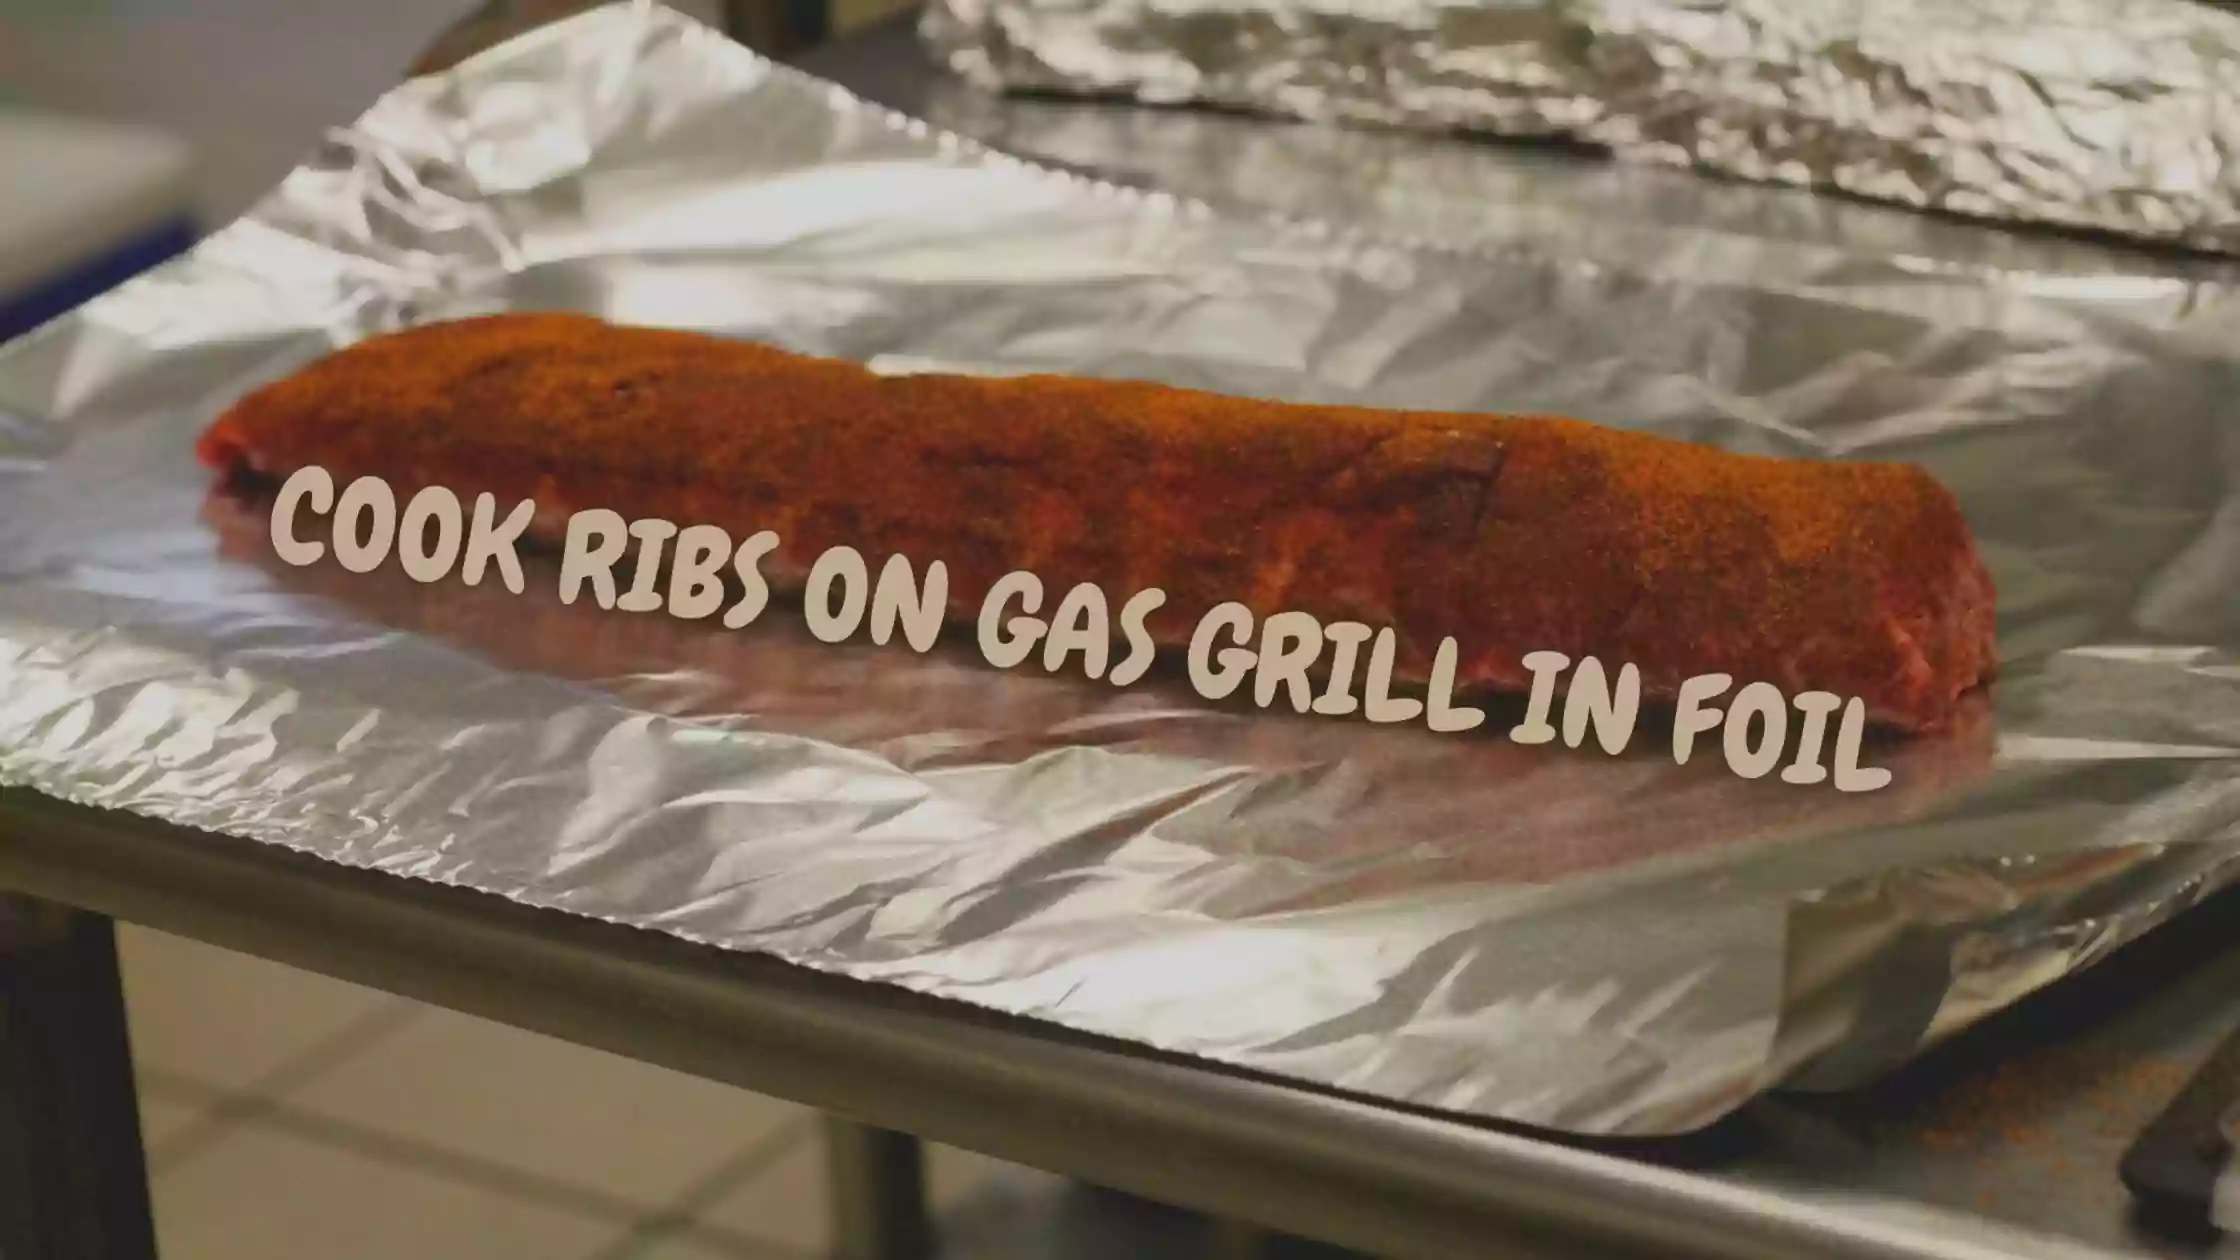 HOW TO COOK RIBS ON GAS GRILL IN FOIL